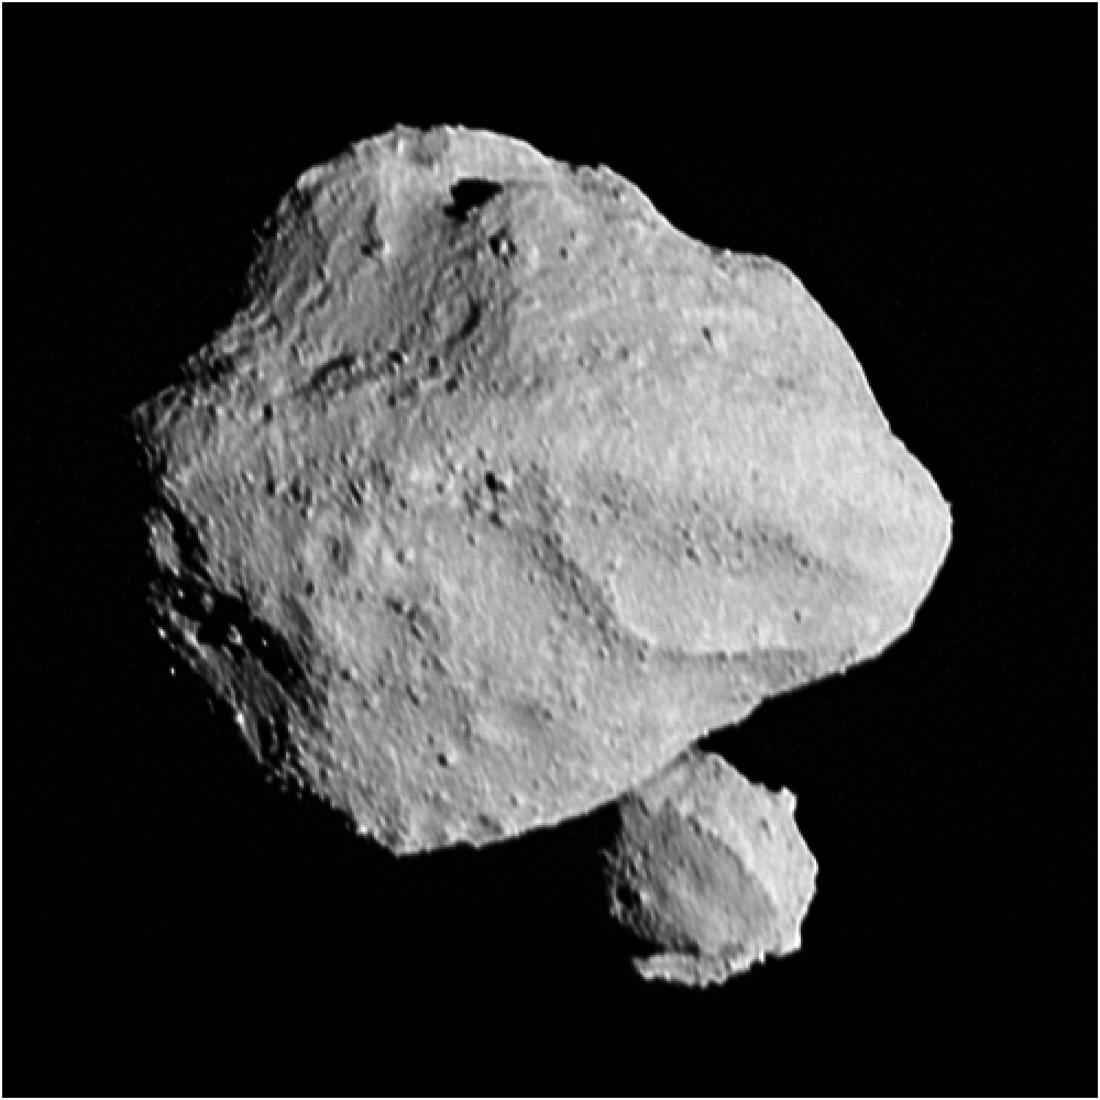 The asteroid Dinkinesh in an image taken by the NASA space probe “Lucy”.  Dinkinesh consists of two asteroids.